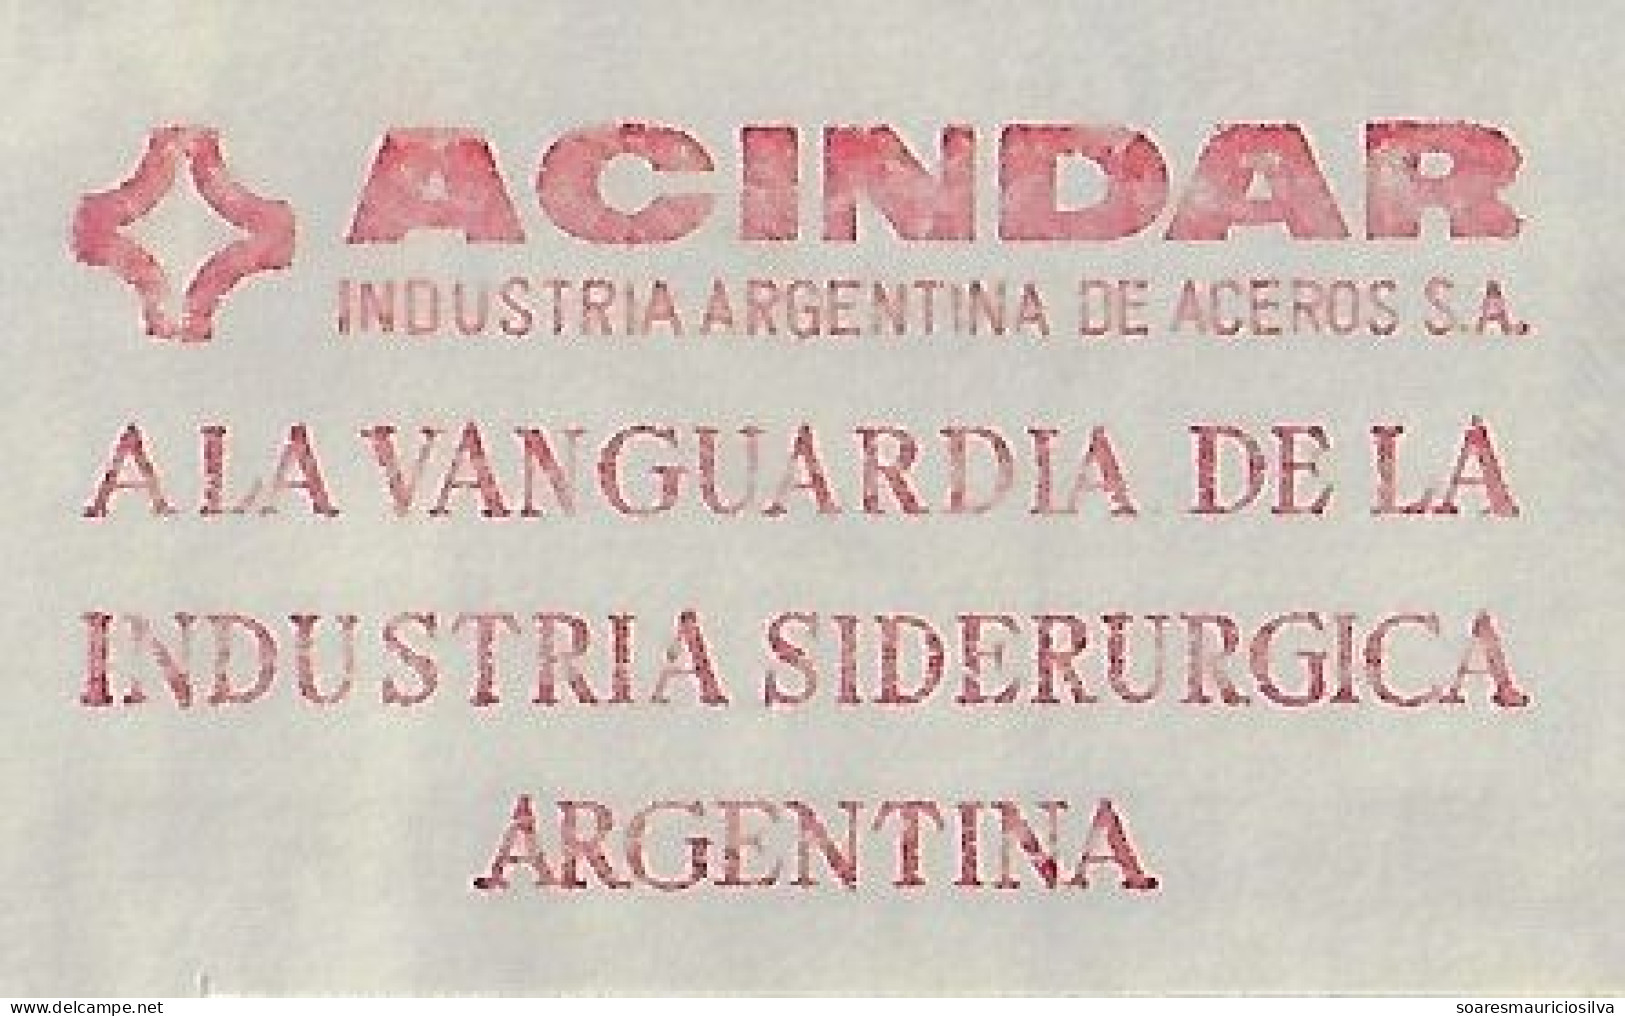 Argentina 1972 Cover From Buenos Aires Meter Stamp Hasler F66/F88 Slogan Steelworks ACINDAR Argentine Steel Industry - Covers & Documents